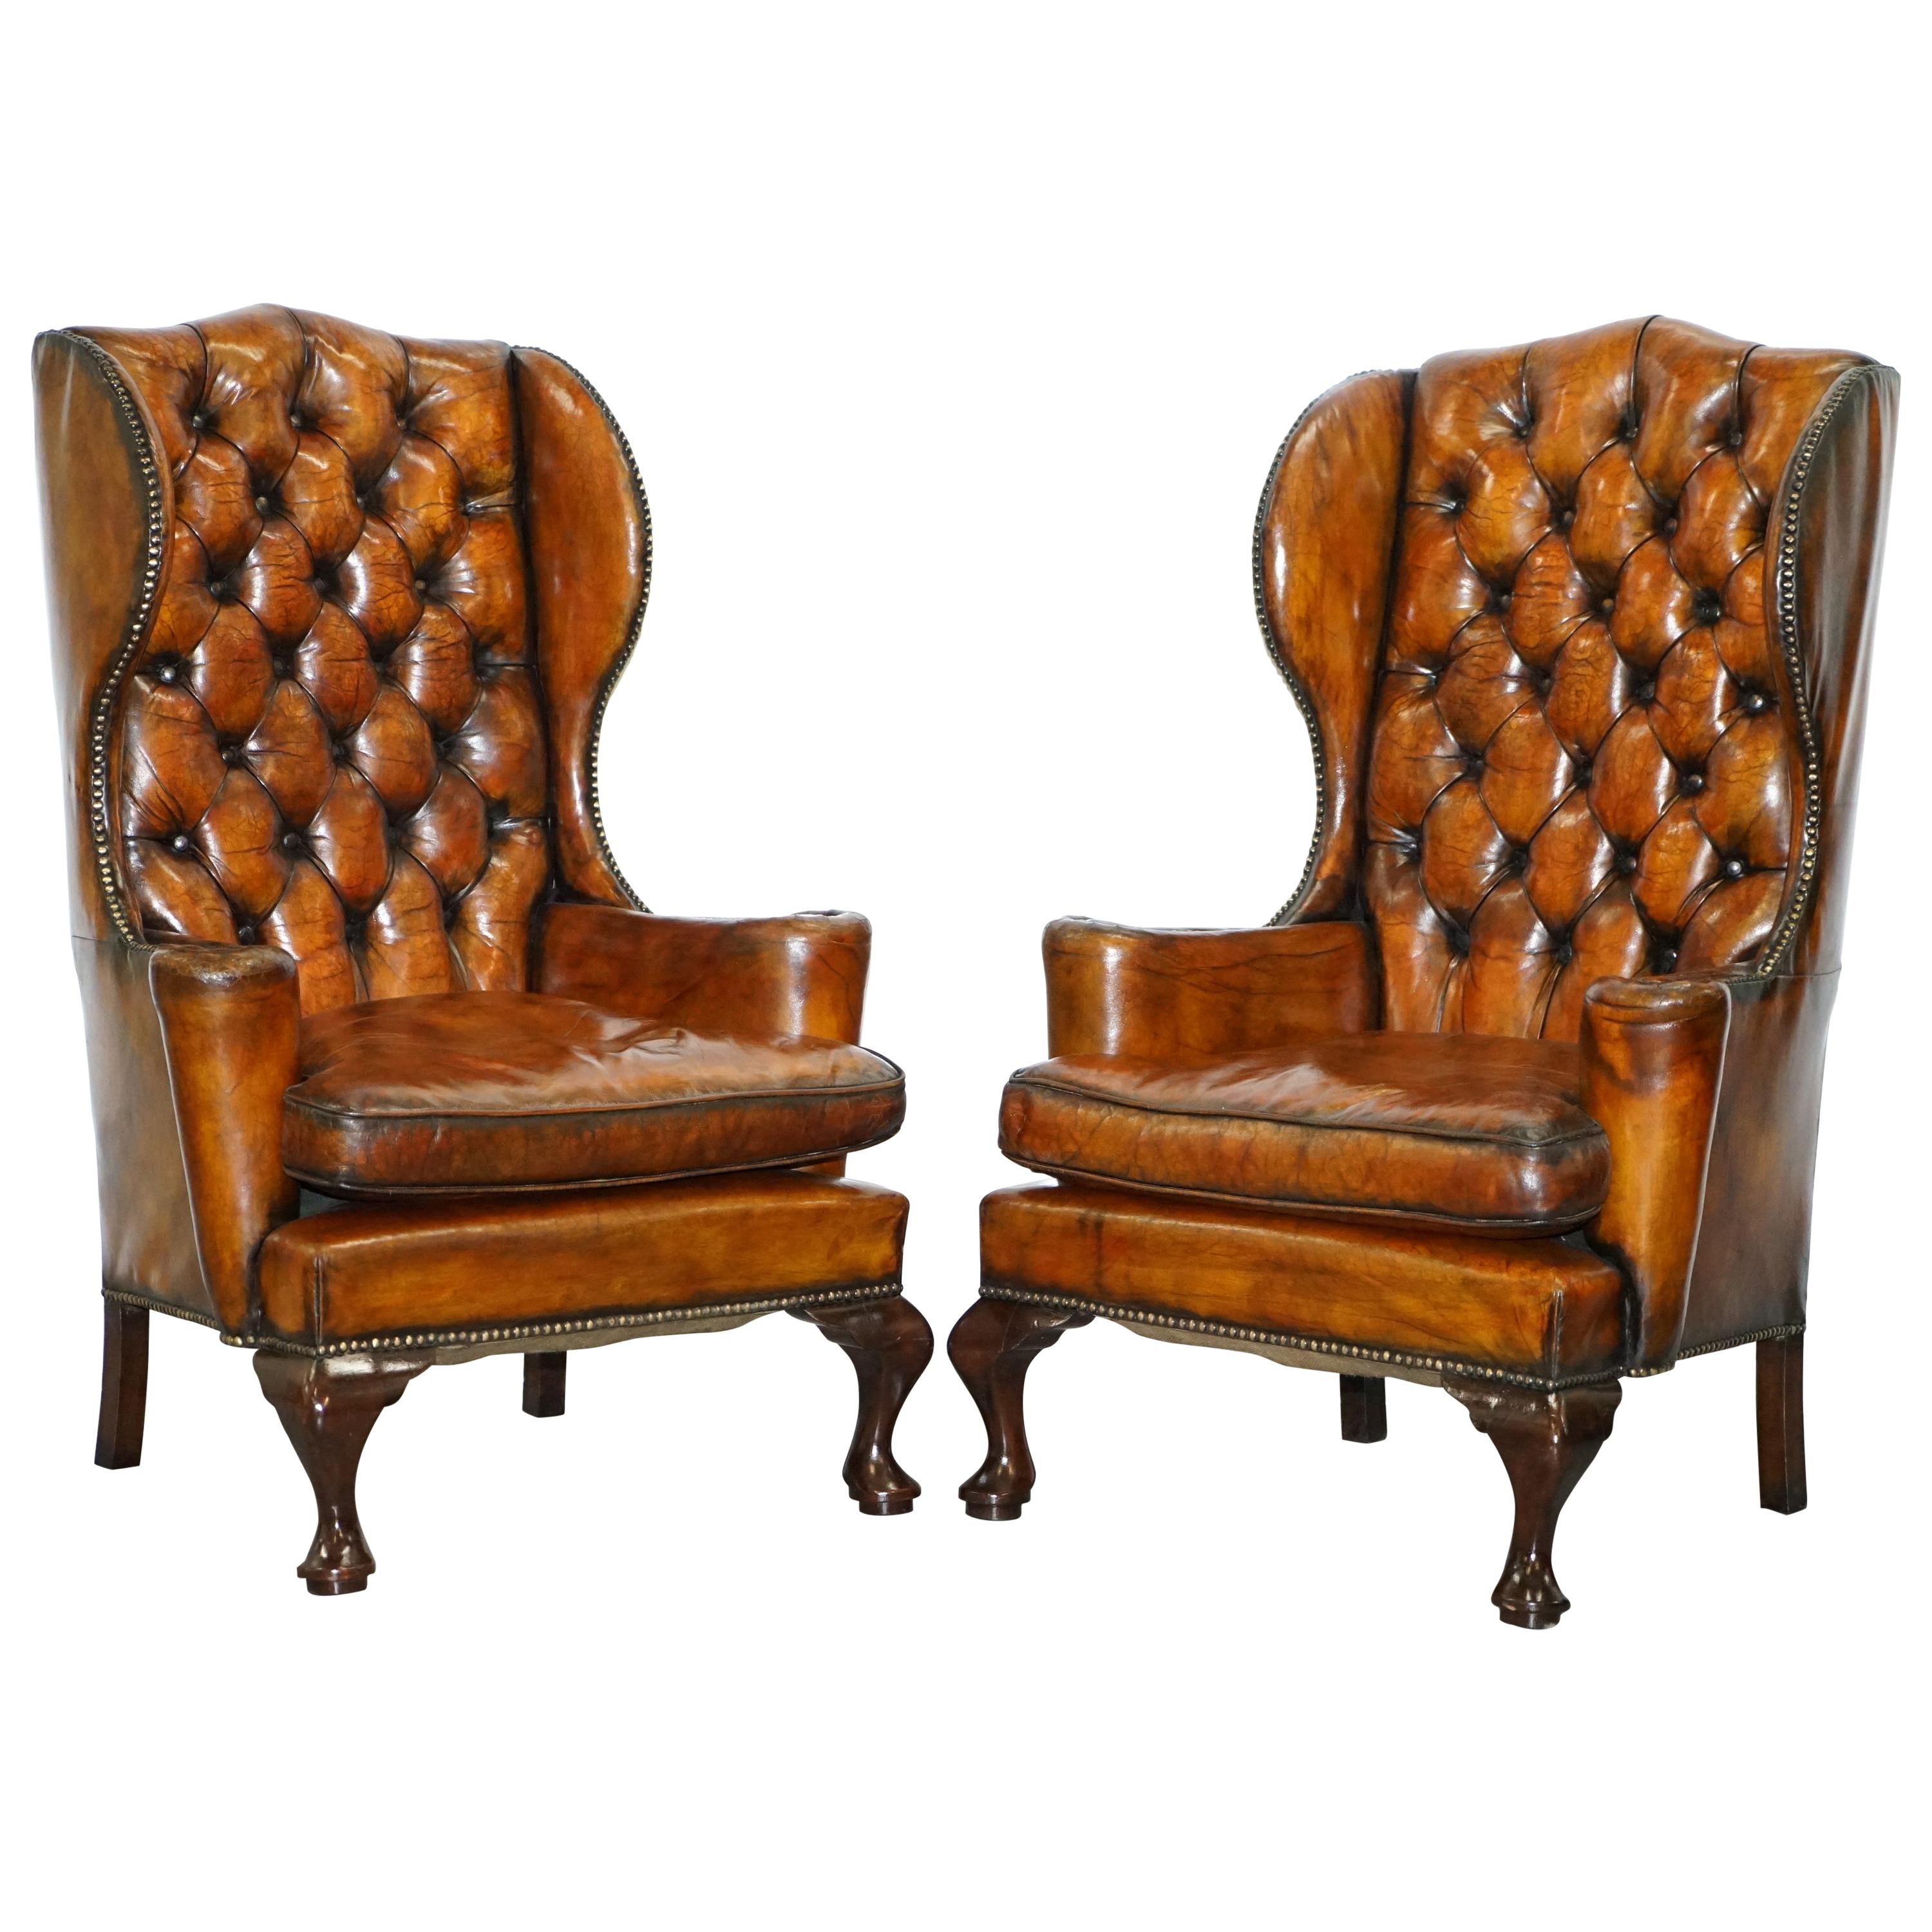 Thomas Chippendale Chesterfield Victorian Wingback Armchairs Brown Leather, Pair